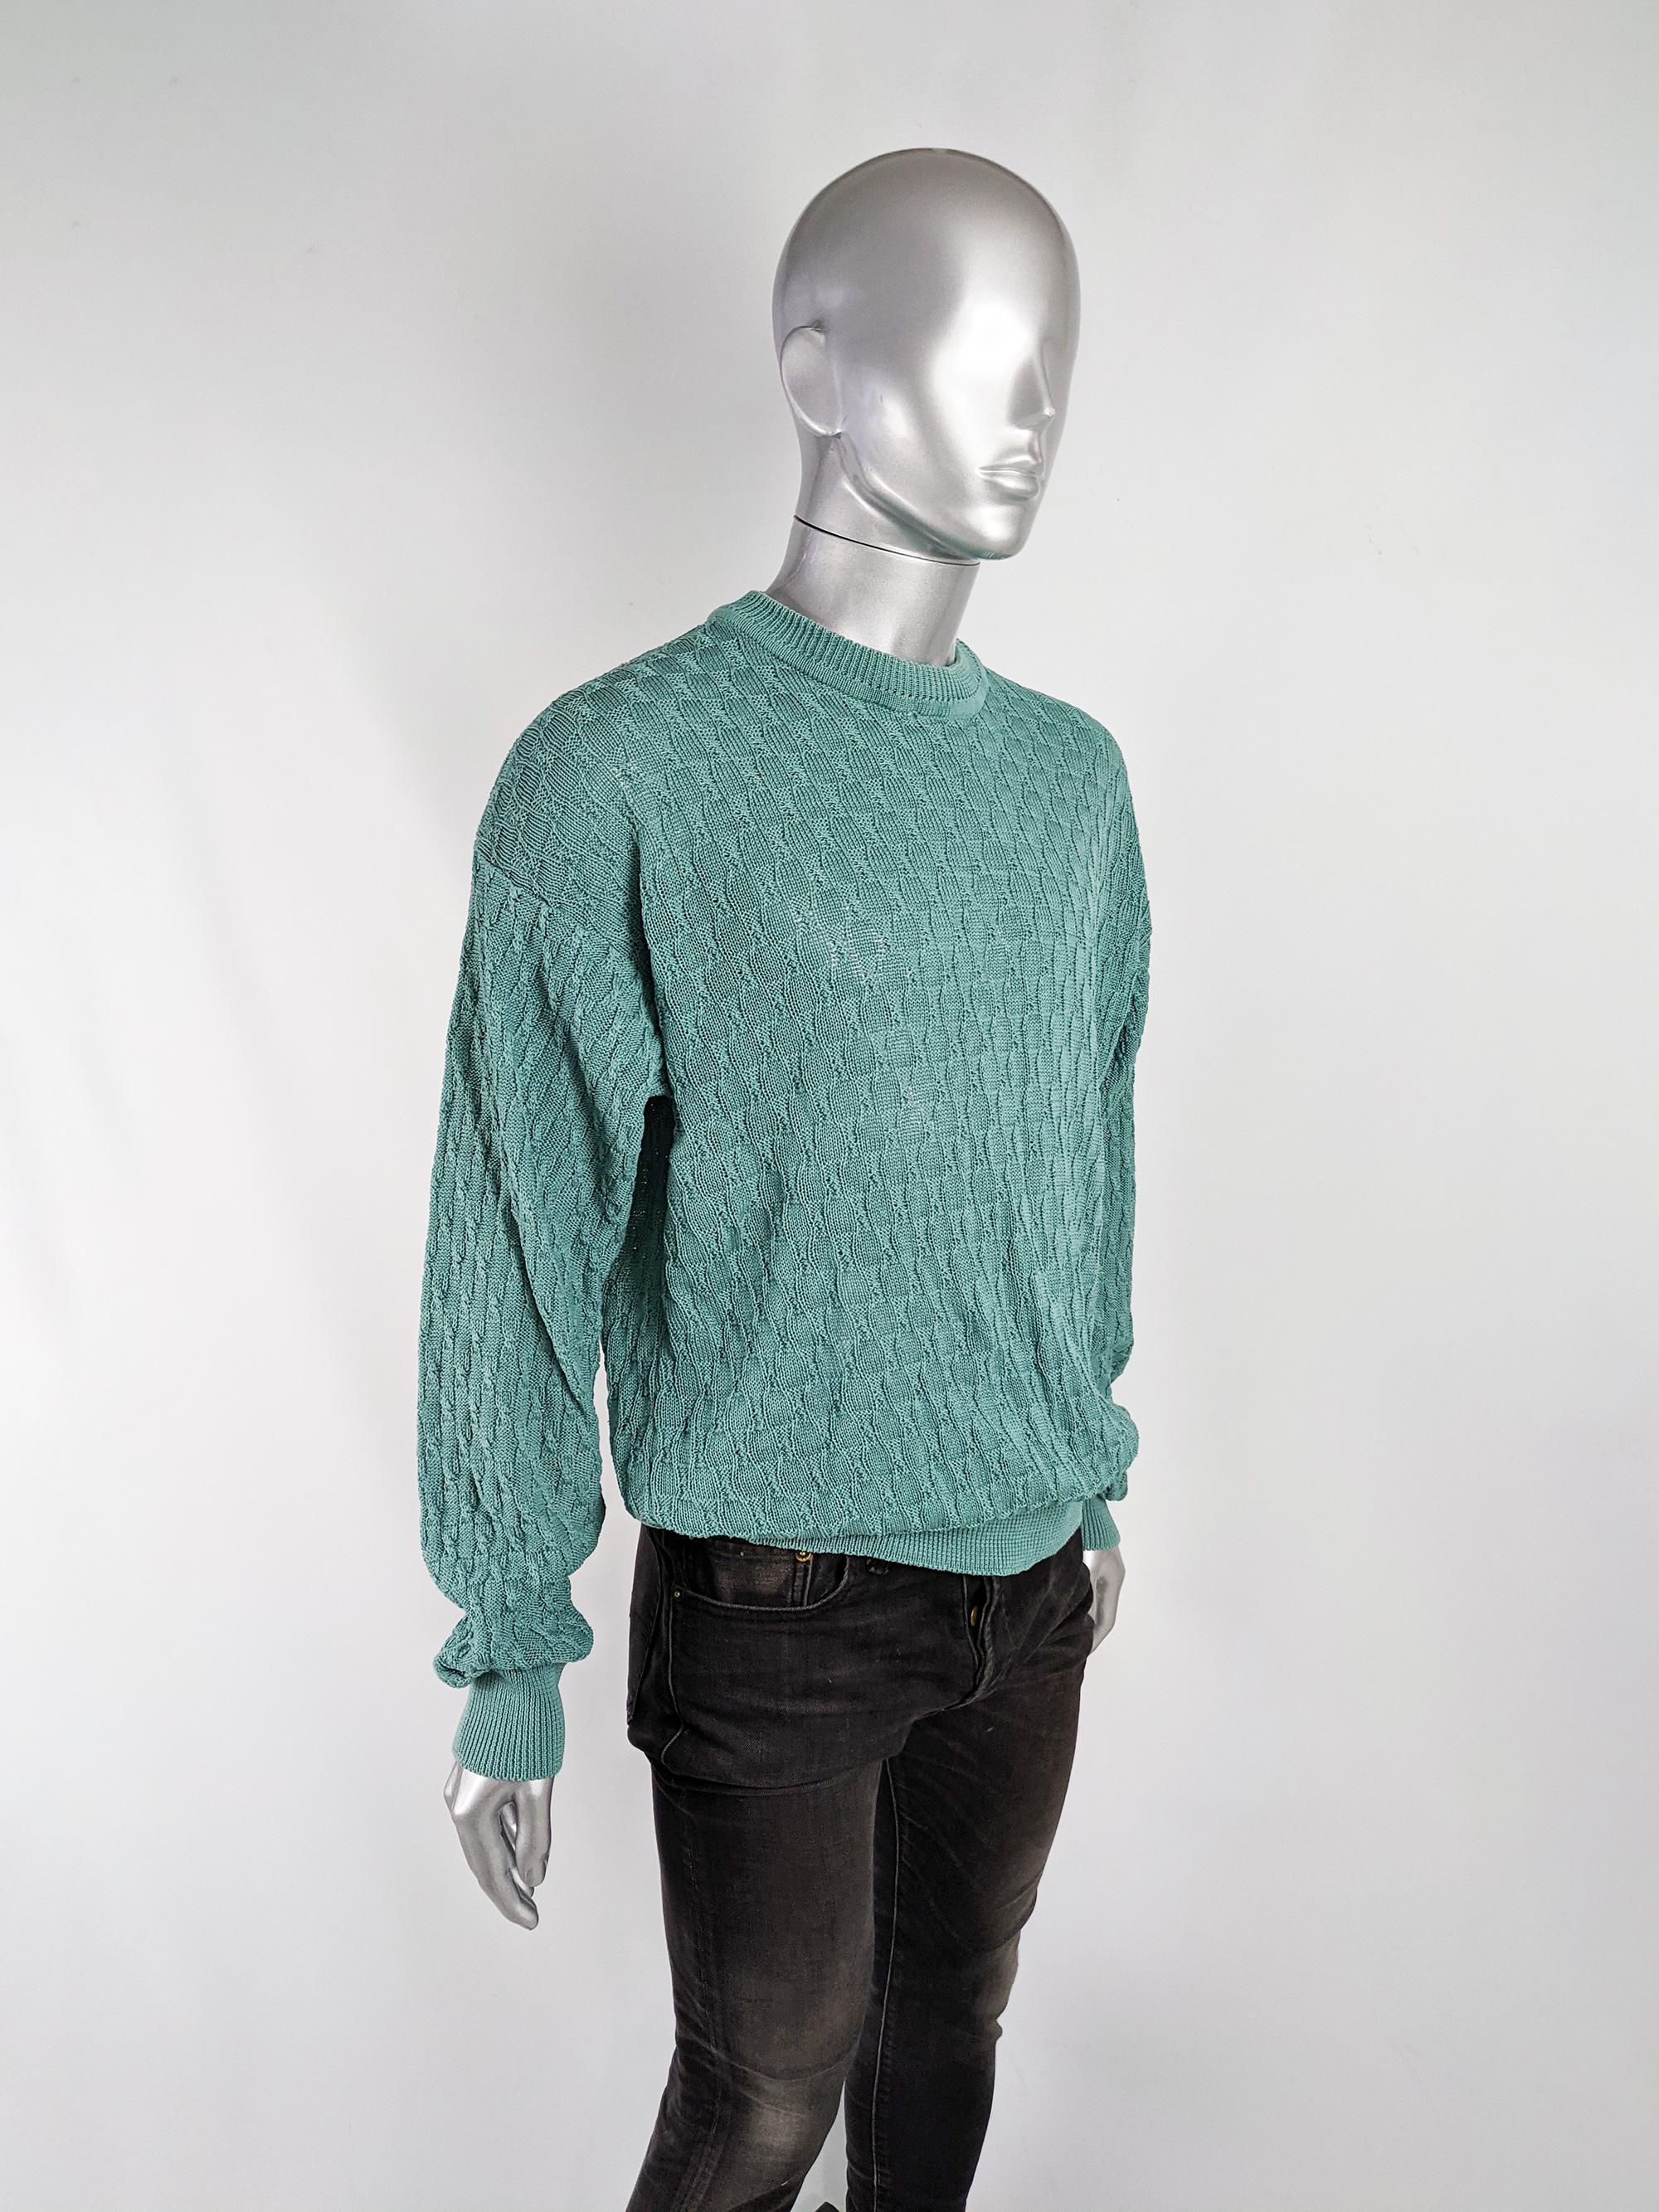 Emanuel Ungaro Vintage Mens Twisted Knit Jumper Sweater, 1980s In Excellent Condition In Doncaster, South Yorkshire